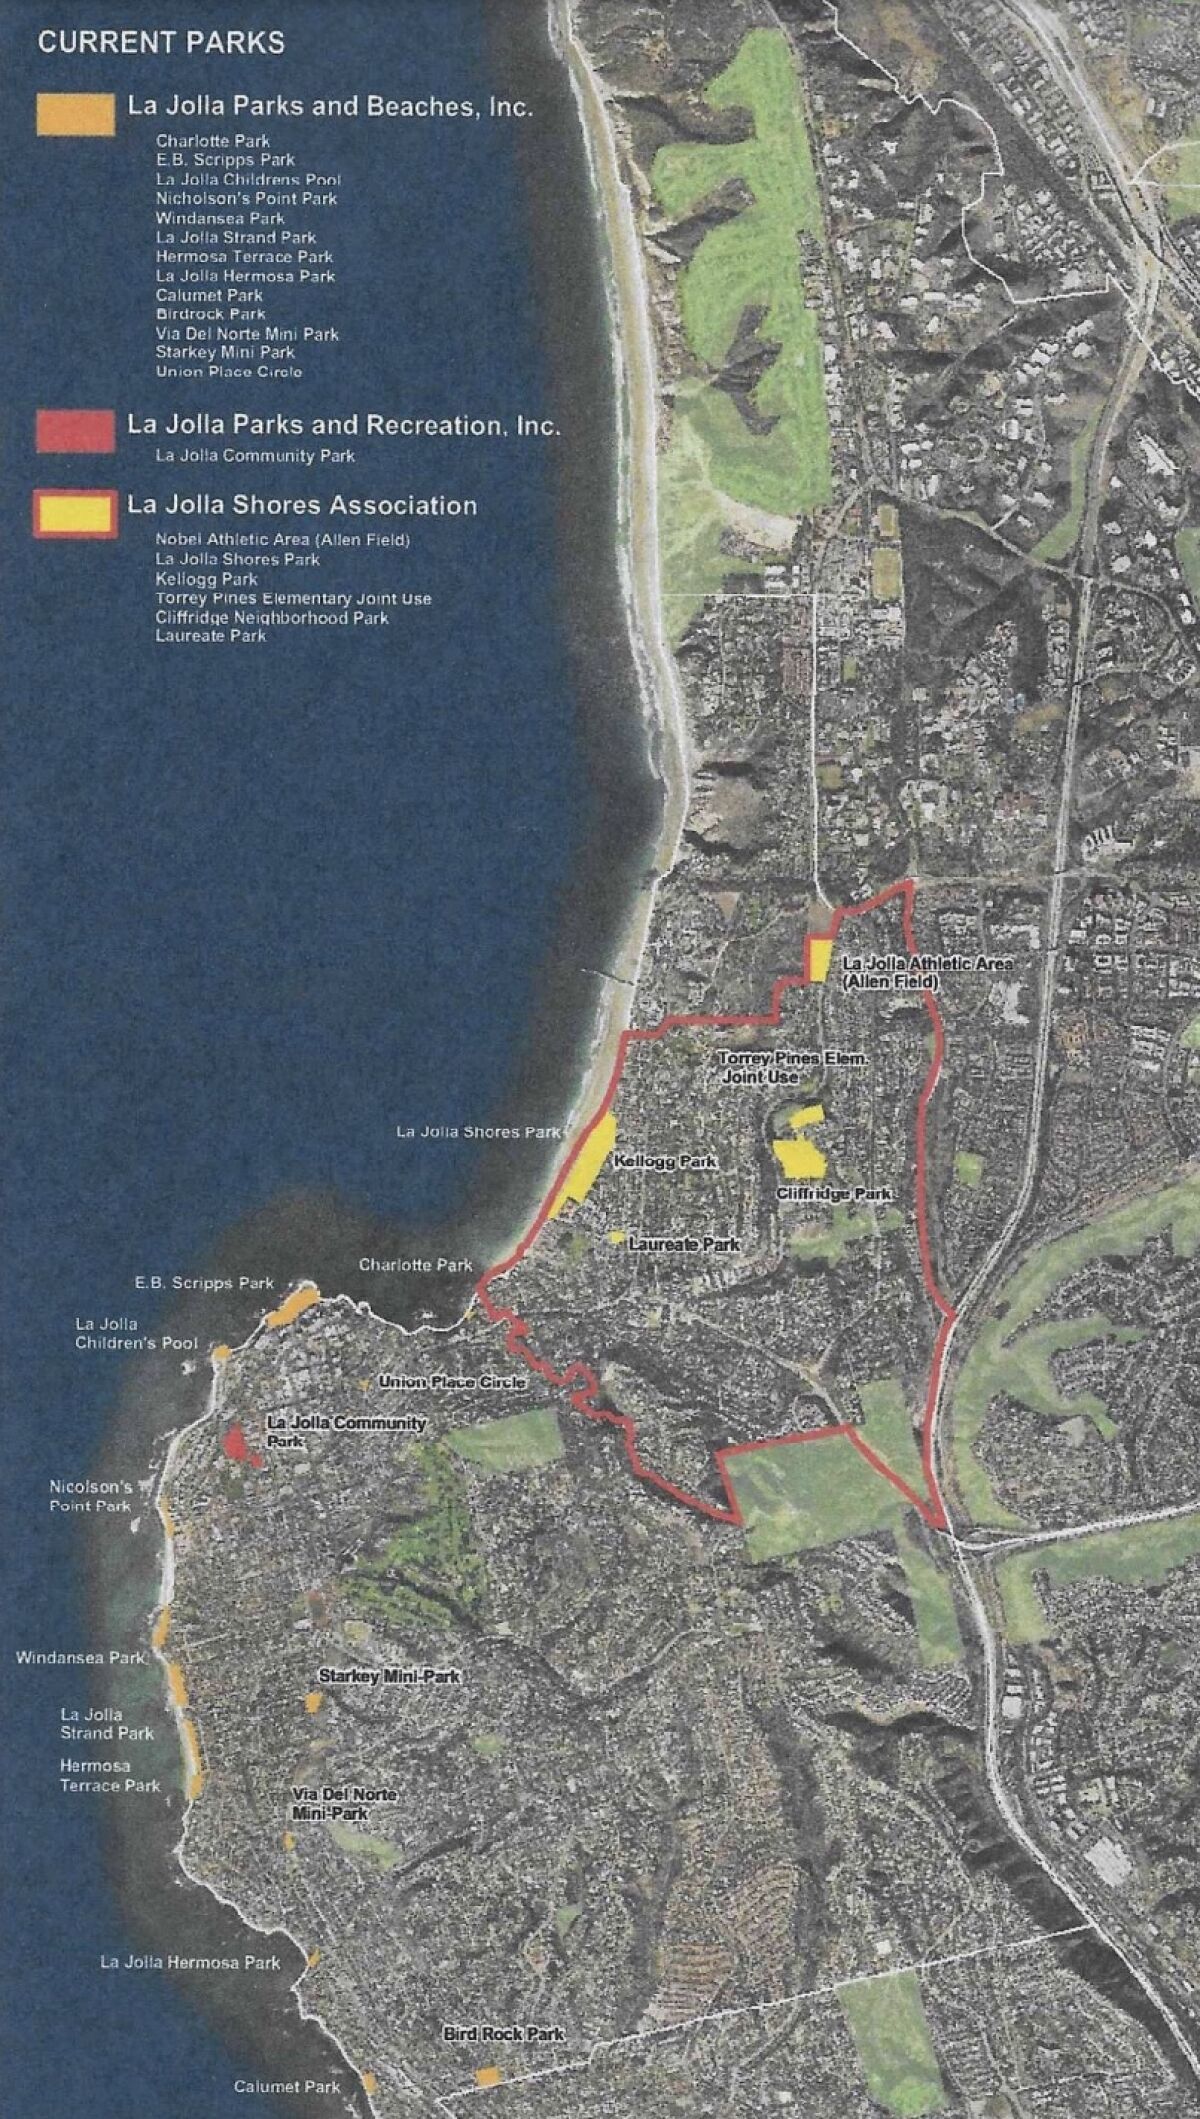 This 2011 map, included with the 2016 La Jolla Parks & Beaches bylaws, led to confusion about the group's purview.